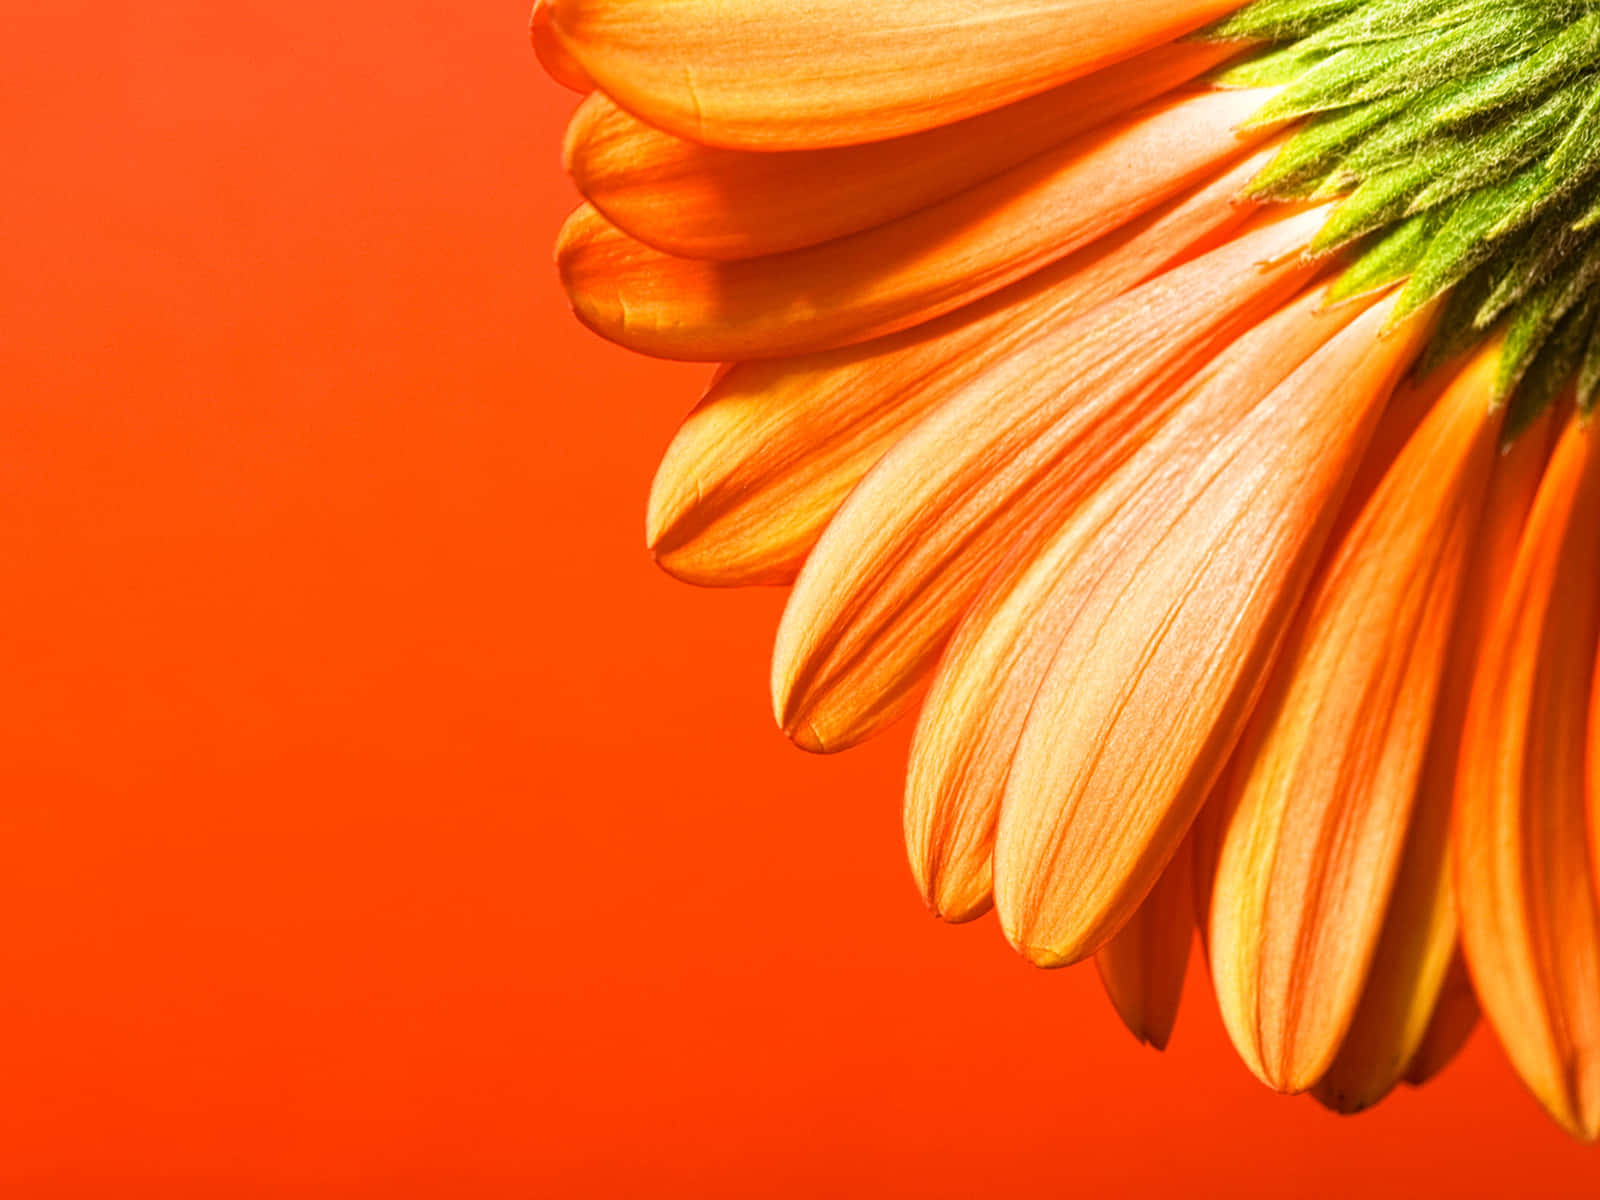 The Bright and Cheerful Hue of Orange